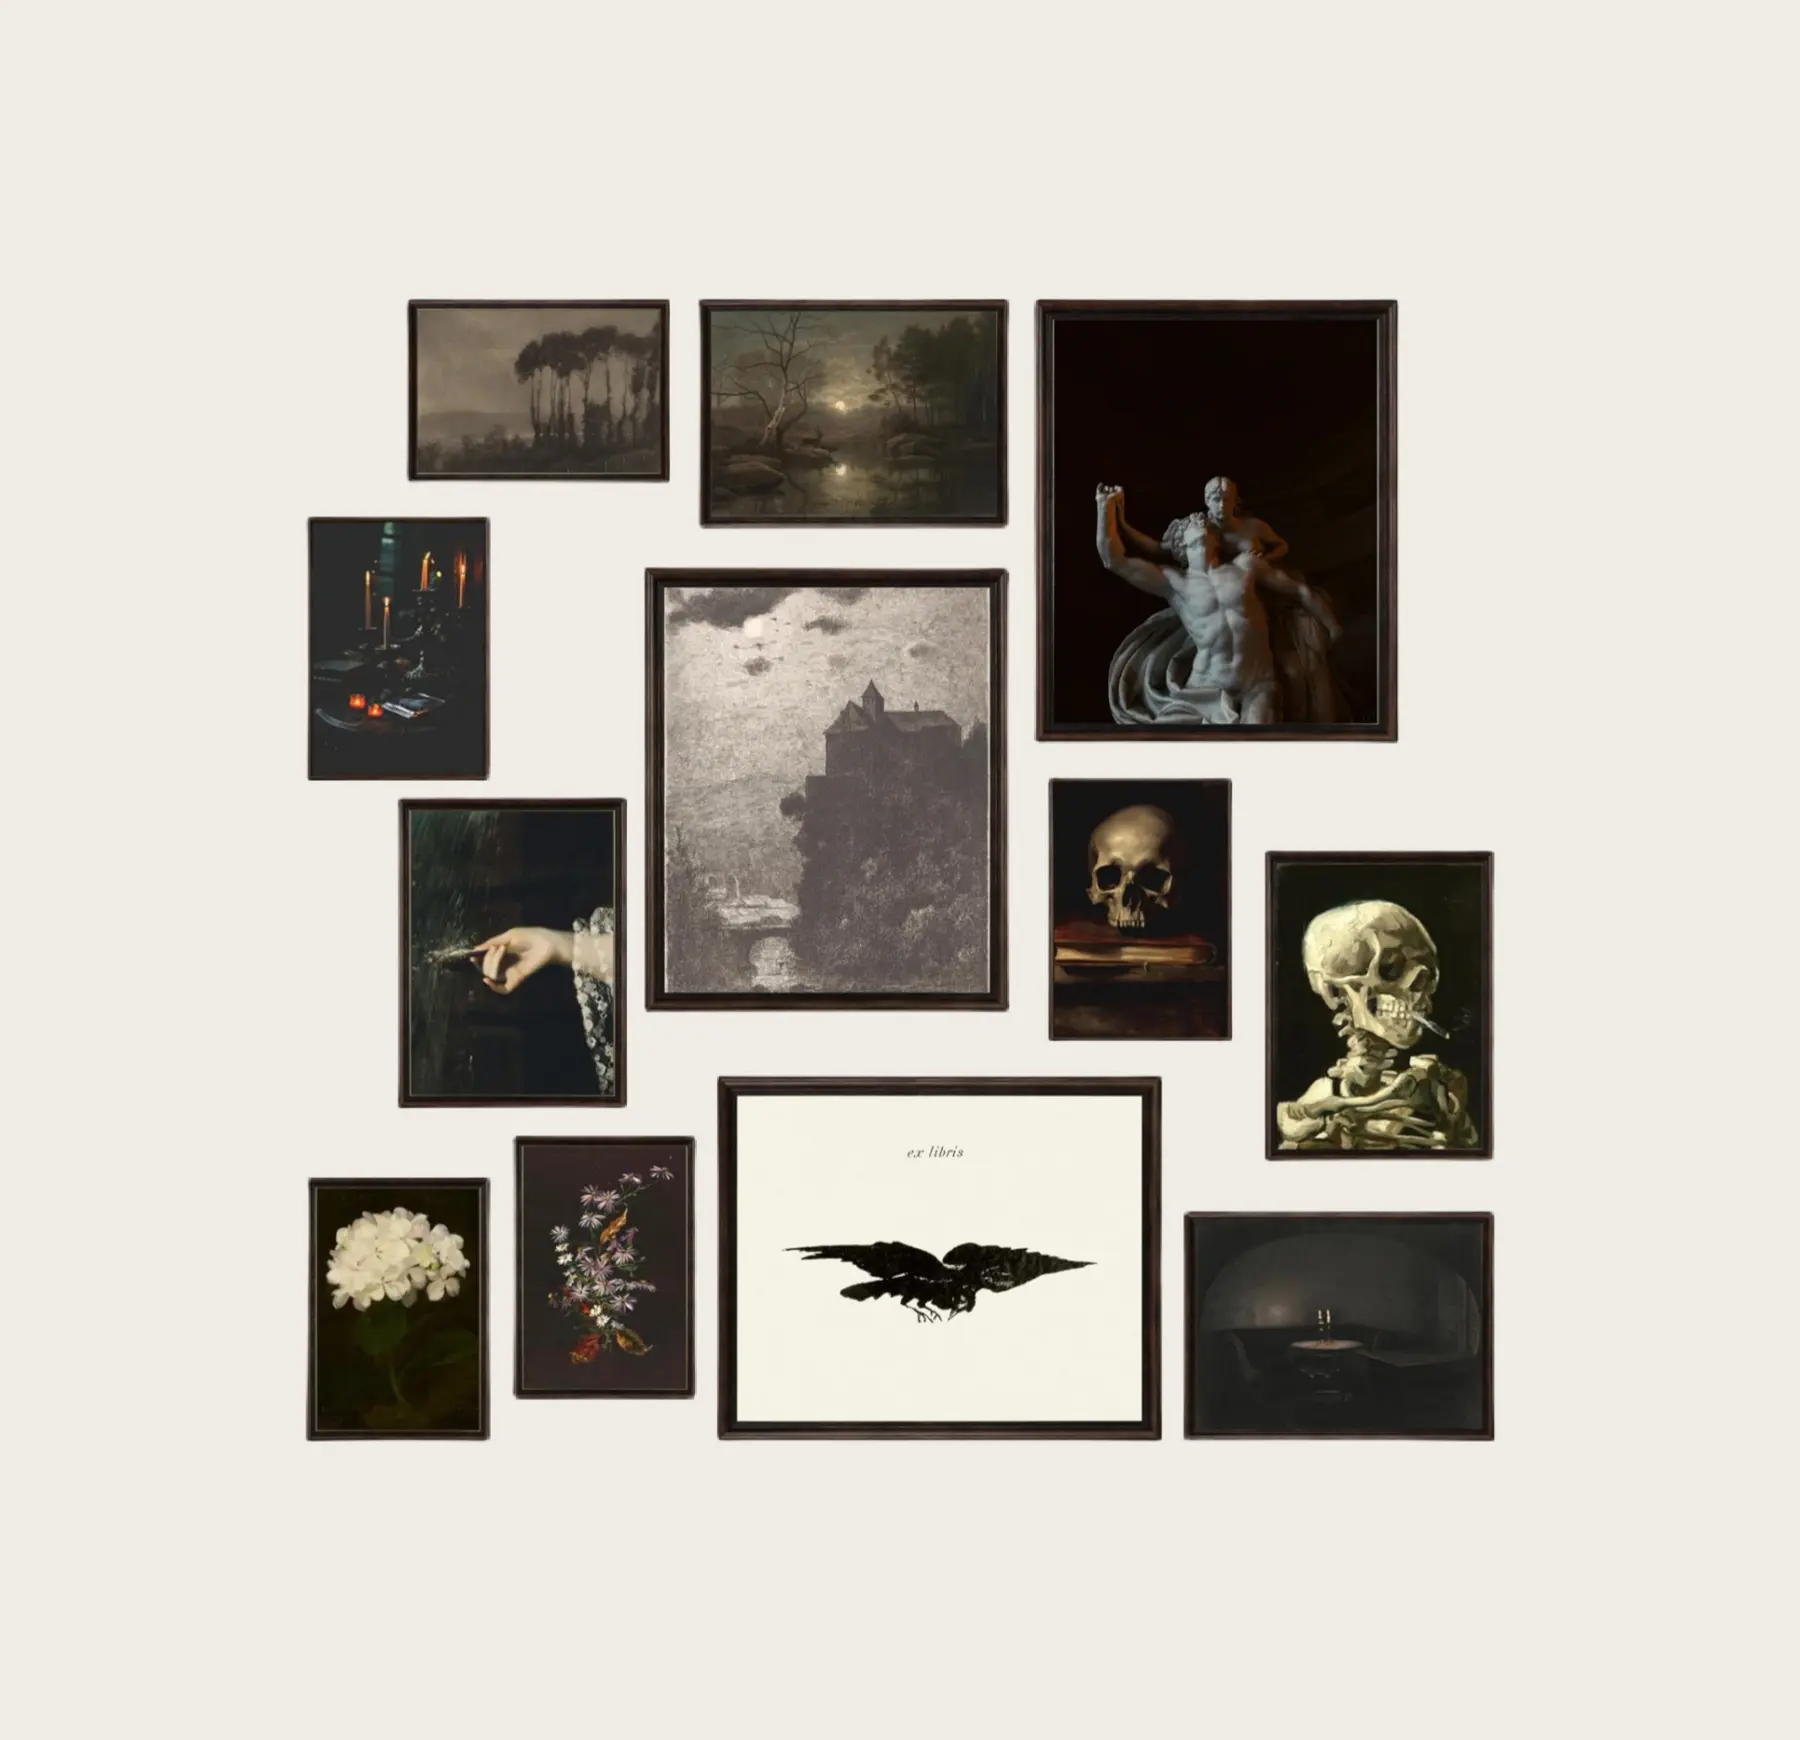 Dark Gothic Moody Halloween Decor Academia Estética Pictures Creepy Posters Art Prints Edgy Witchy Gallery Wall Art